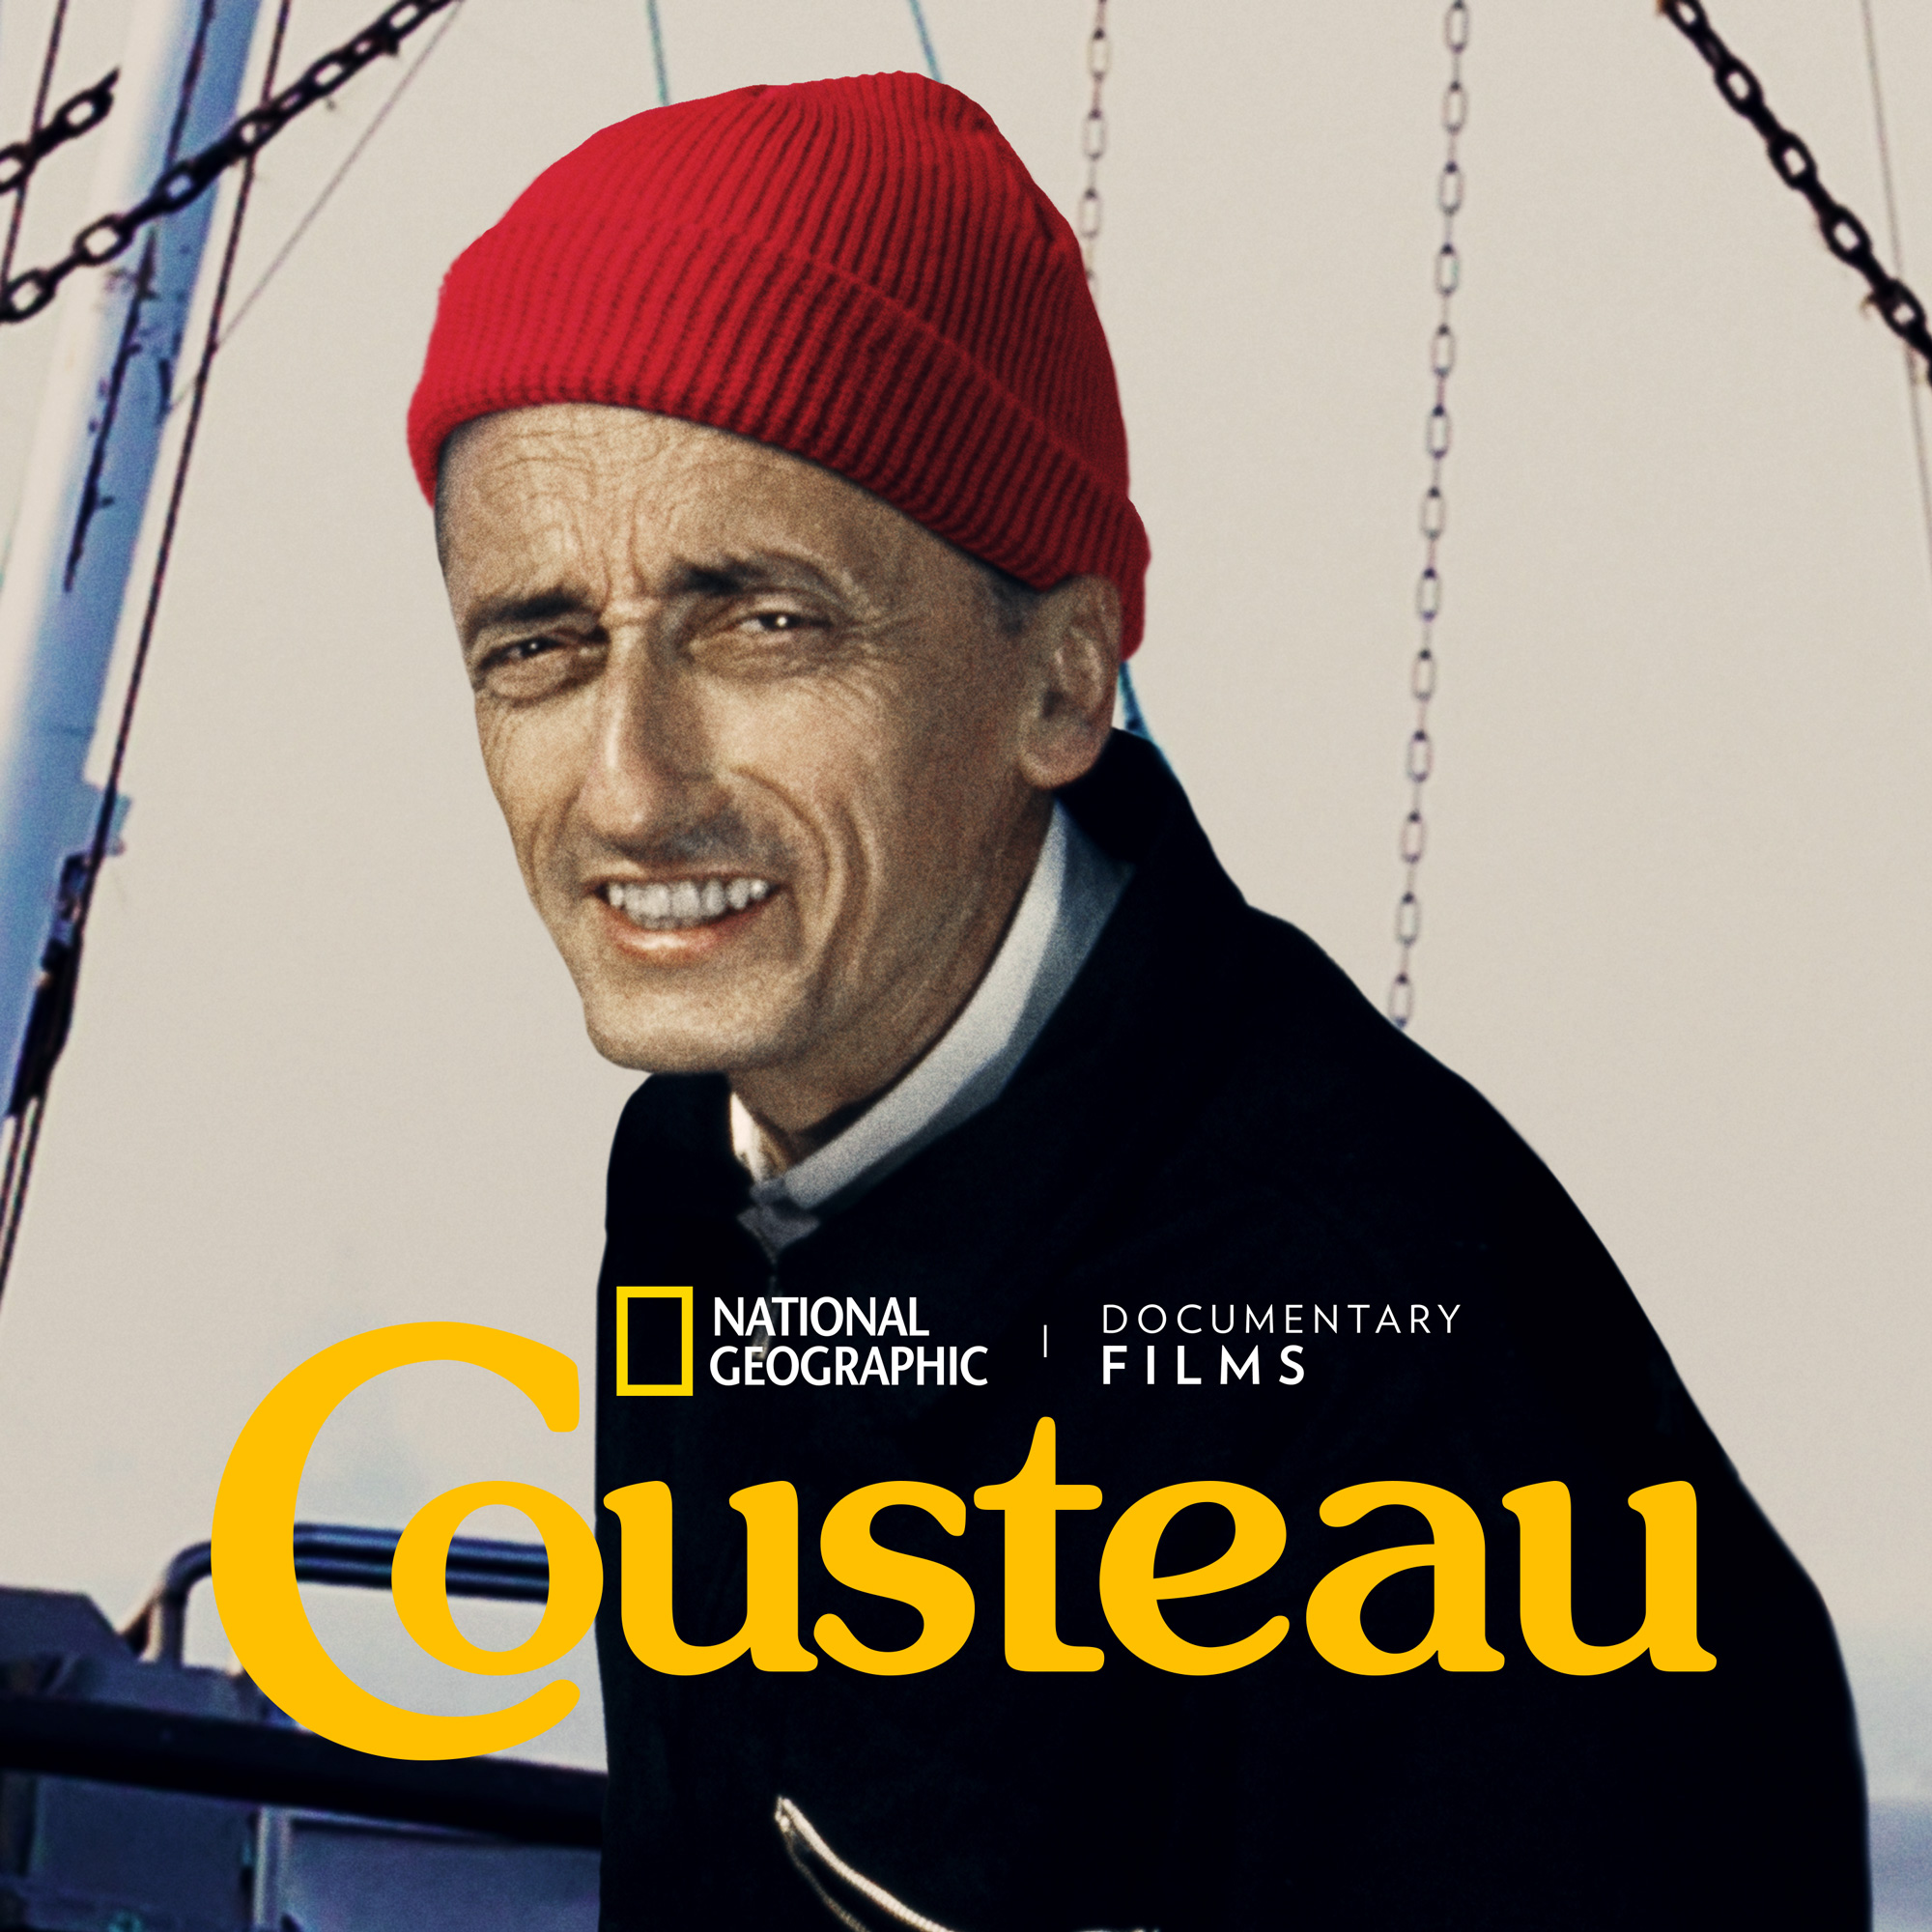 Becoming Cousteau